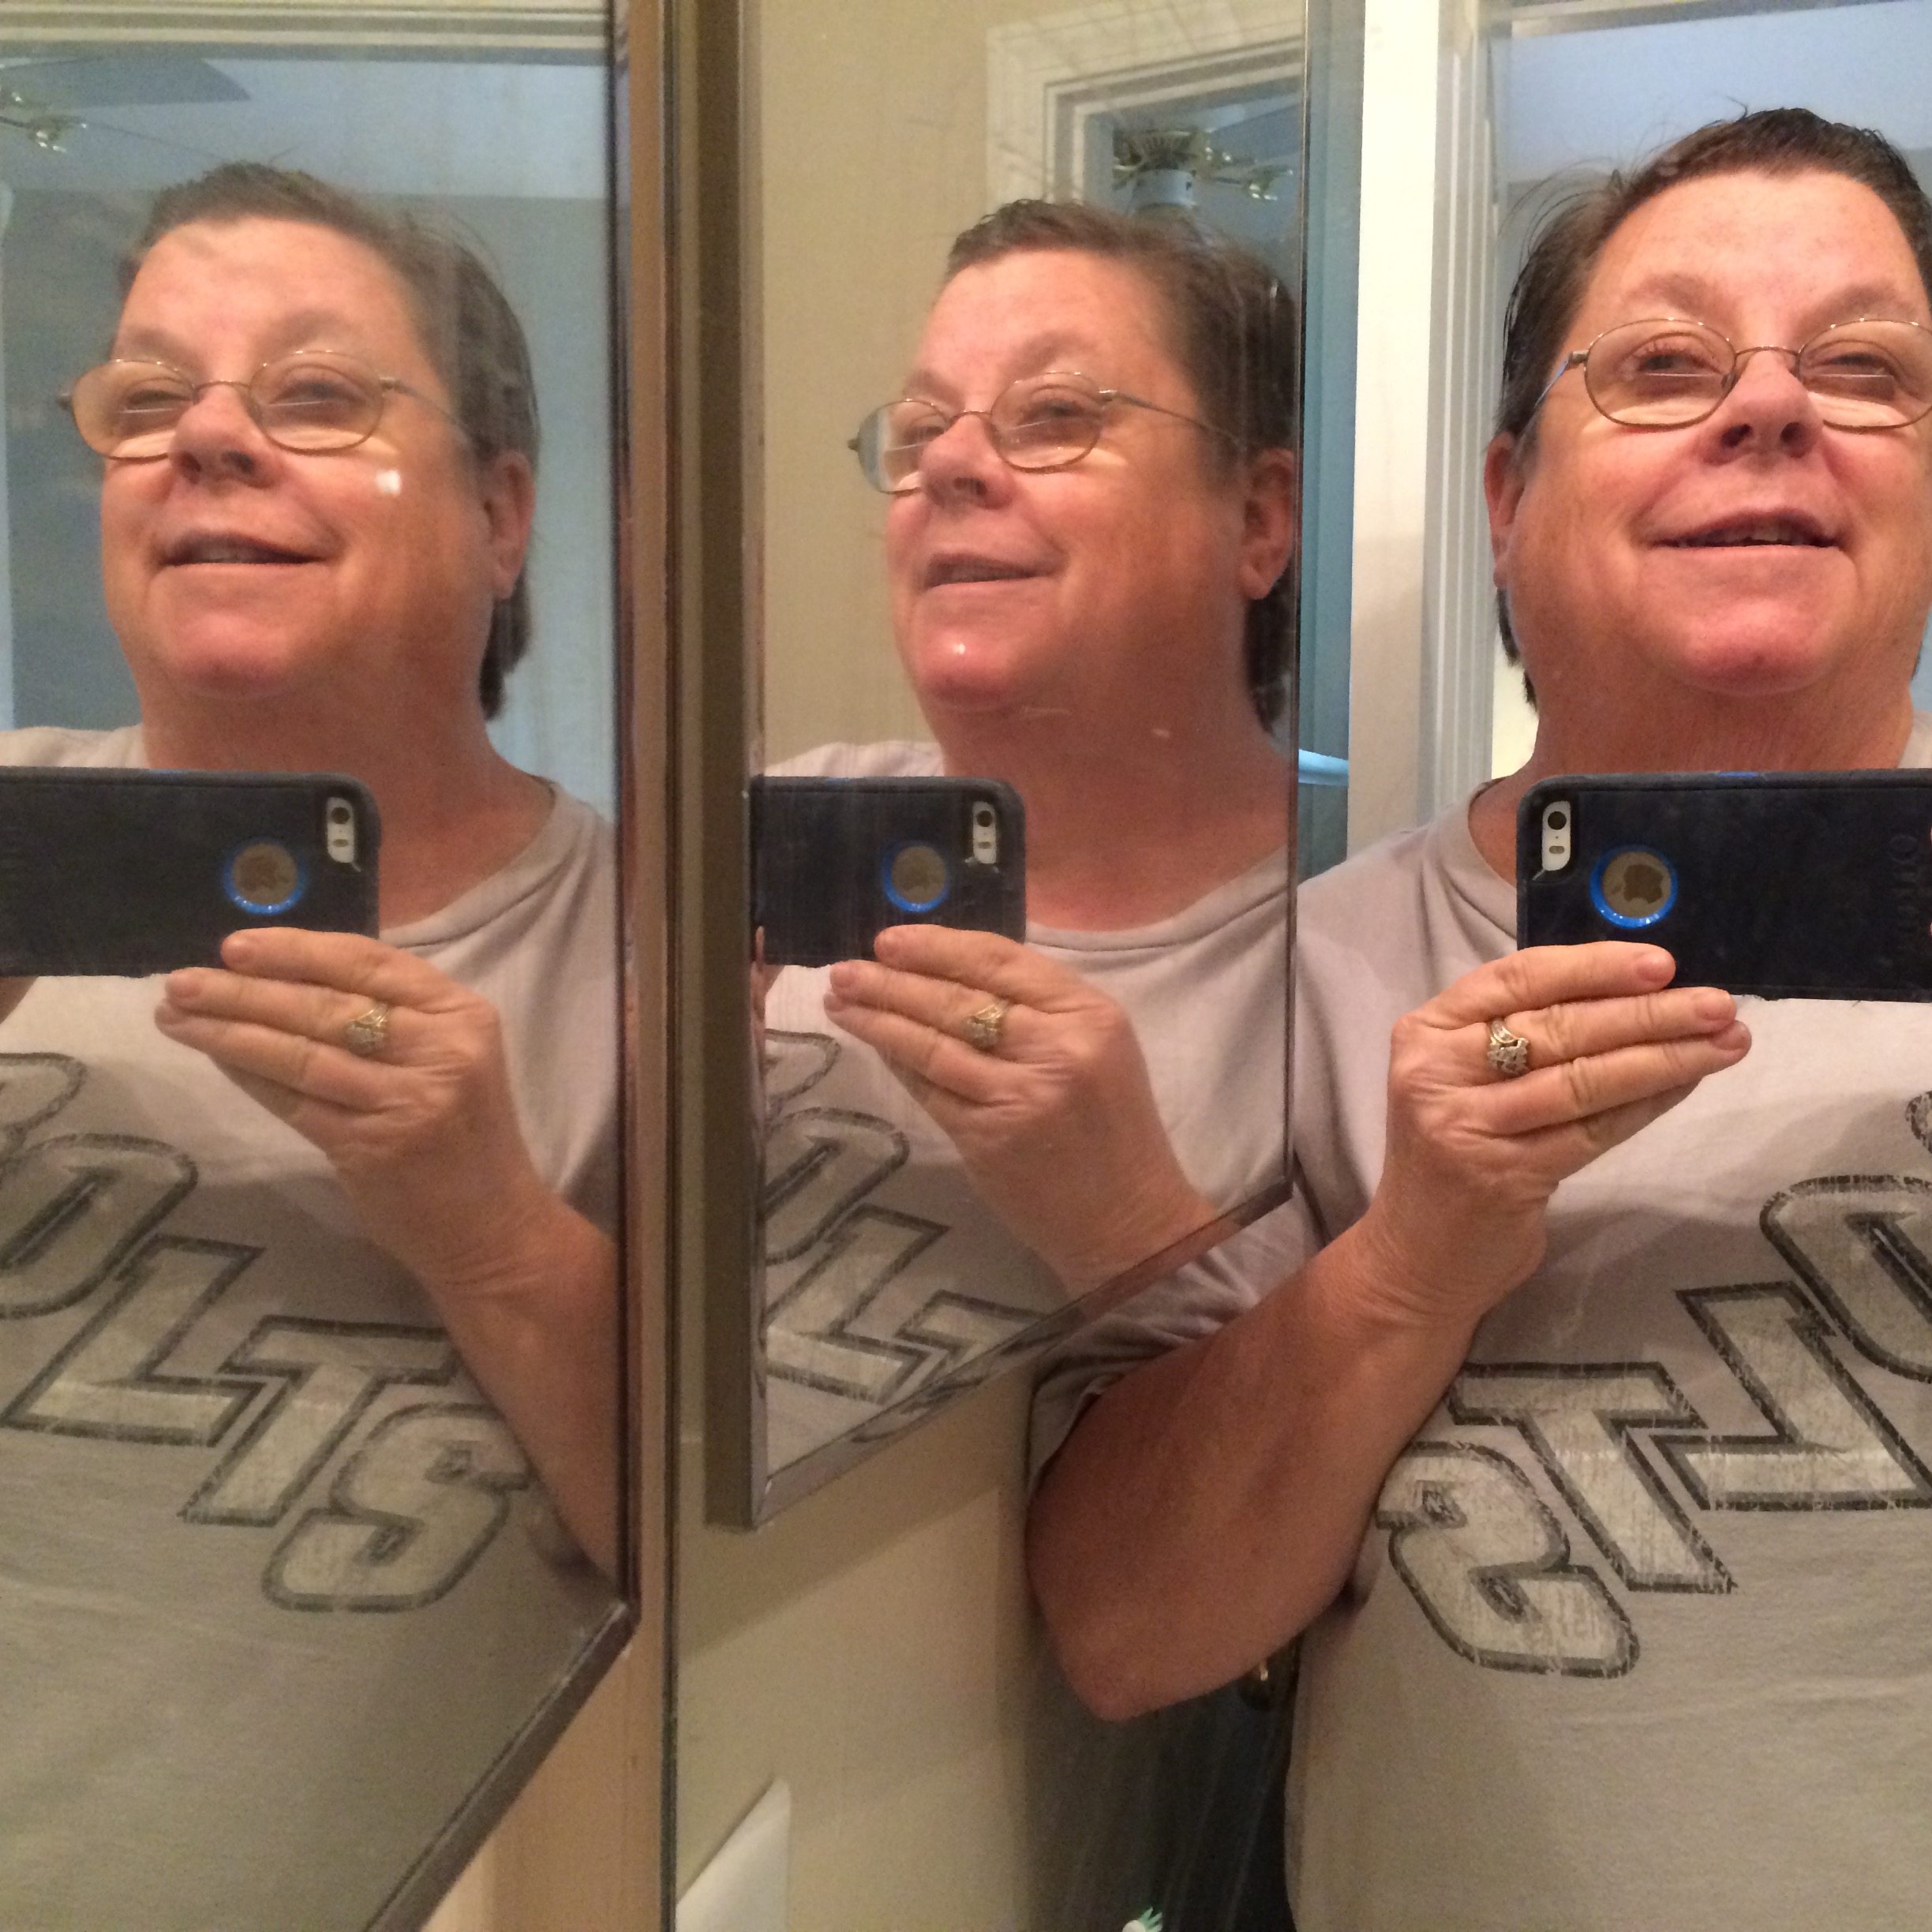 Three faces in the bathroom mirrors.